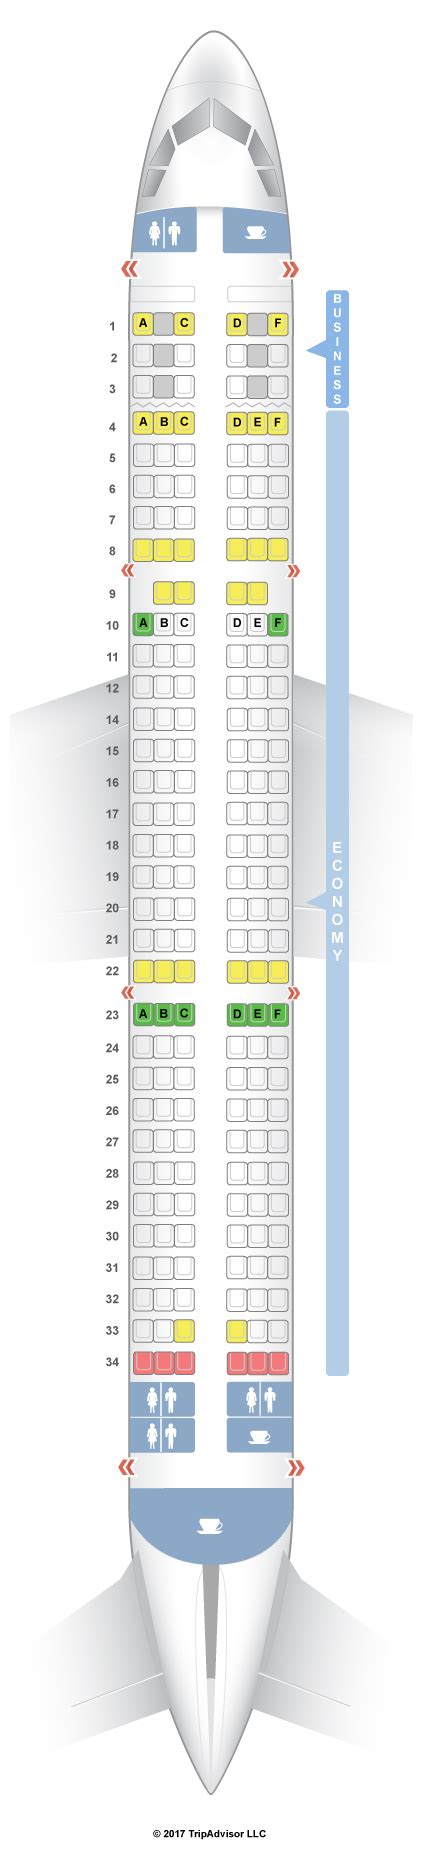 Alitalia Airbus A Seating Plan Images And Photos Finder